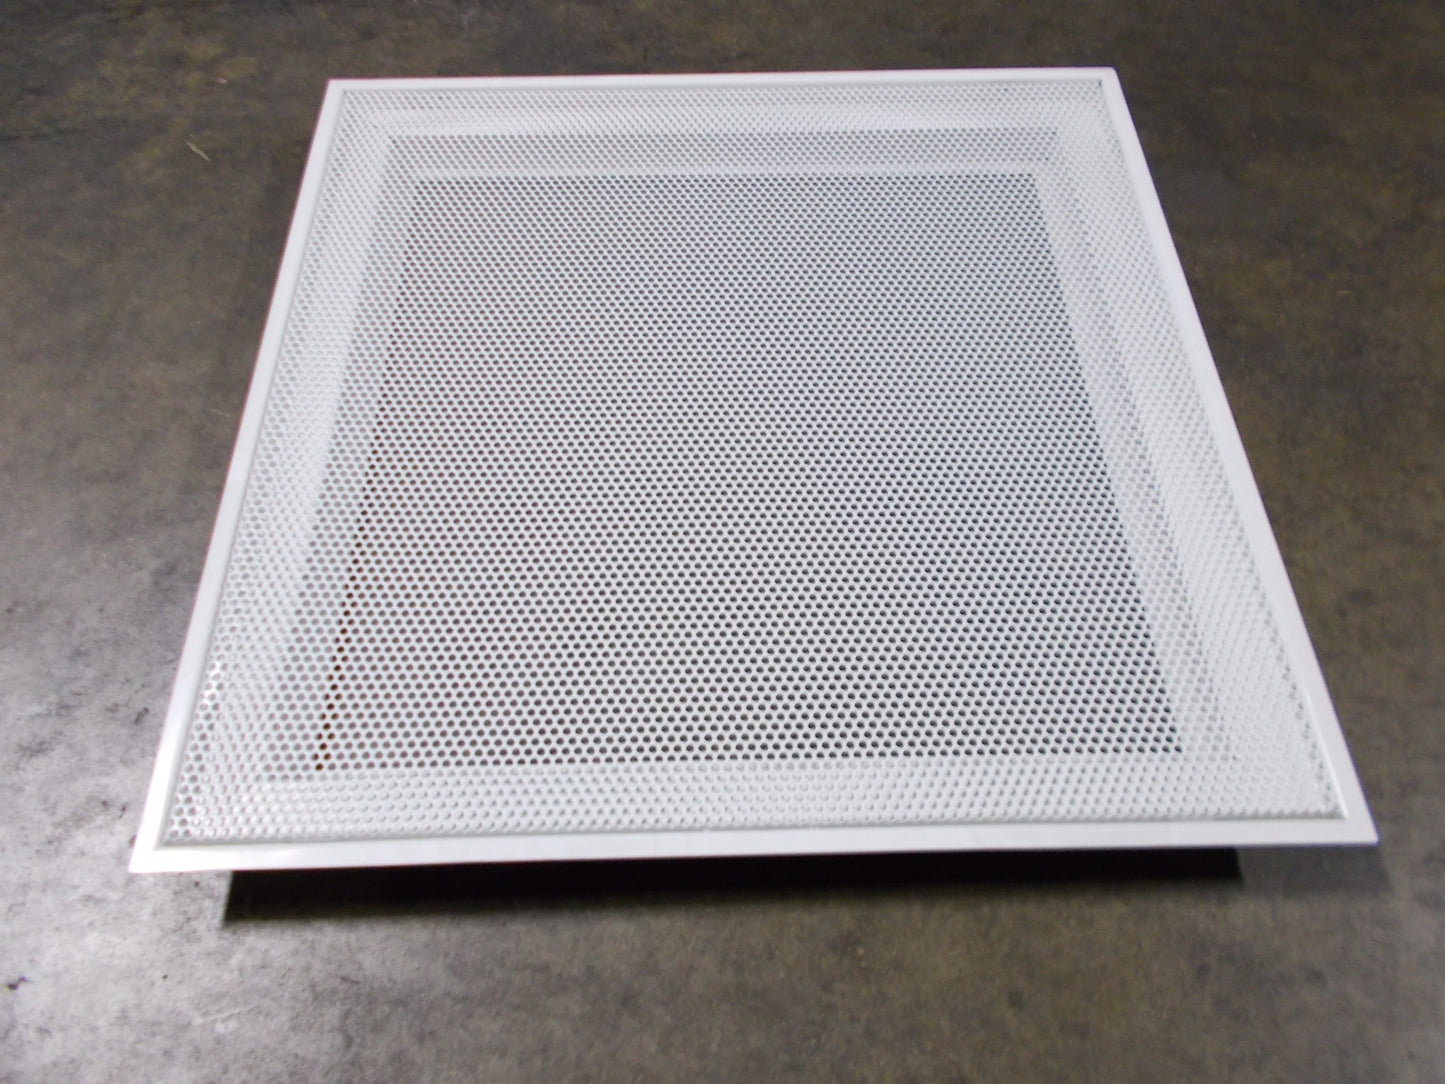 20" X 20" STEEL/WHITE PERFORATED FILTER BACK DIFFUSER